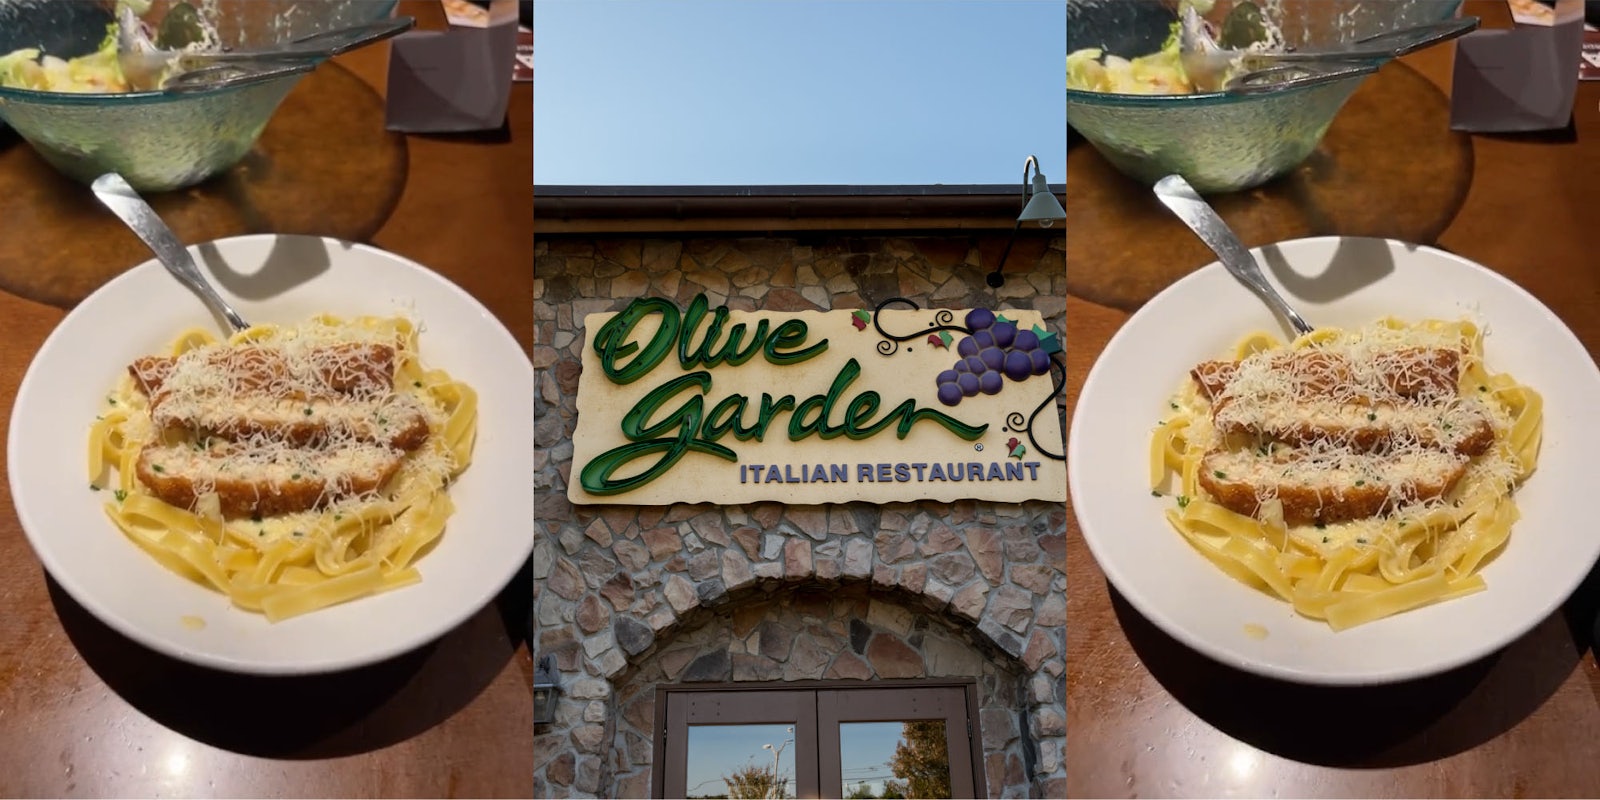 Olive Garden pasta dish on table (l) Olive Garden sign (c) Olive Garden pasta dish on table (r)